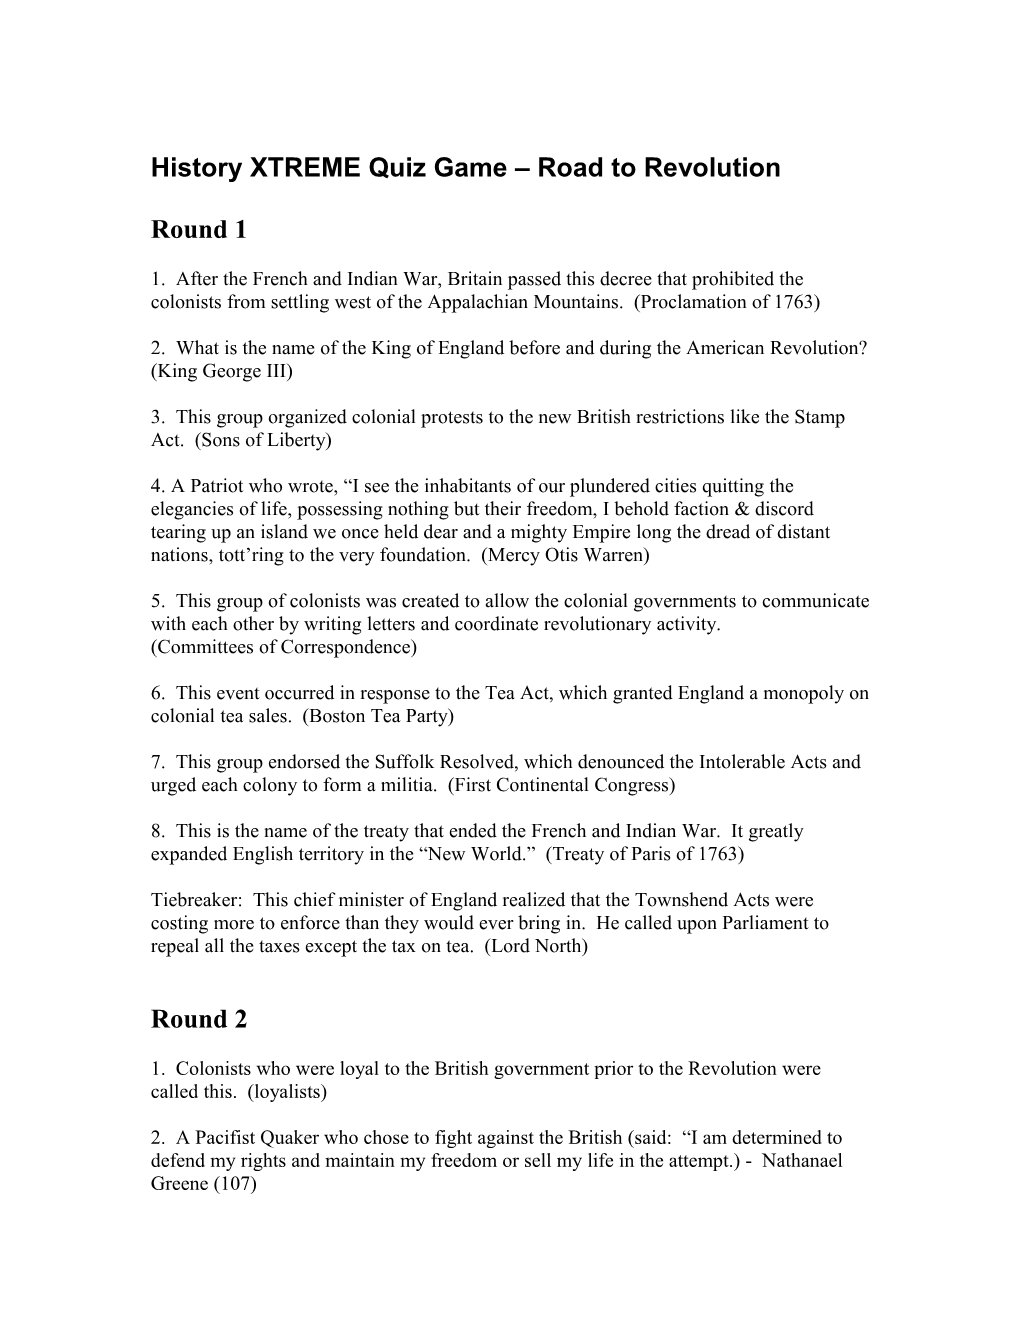 History XTREME Quiz Game Road to Revolution